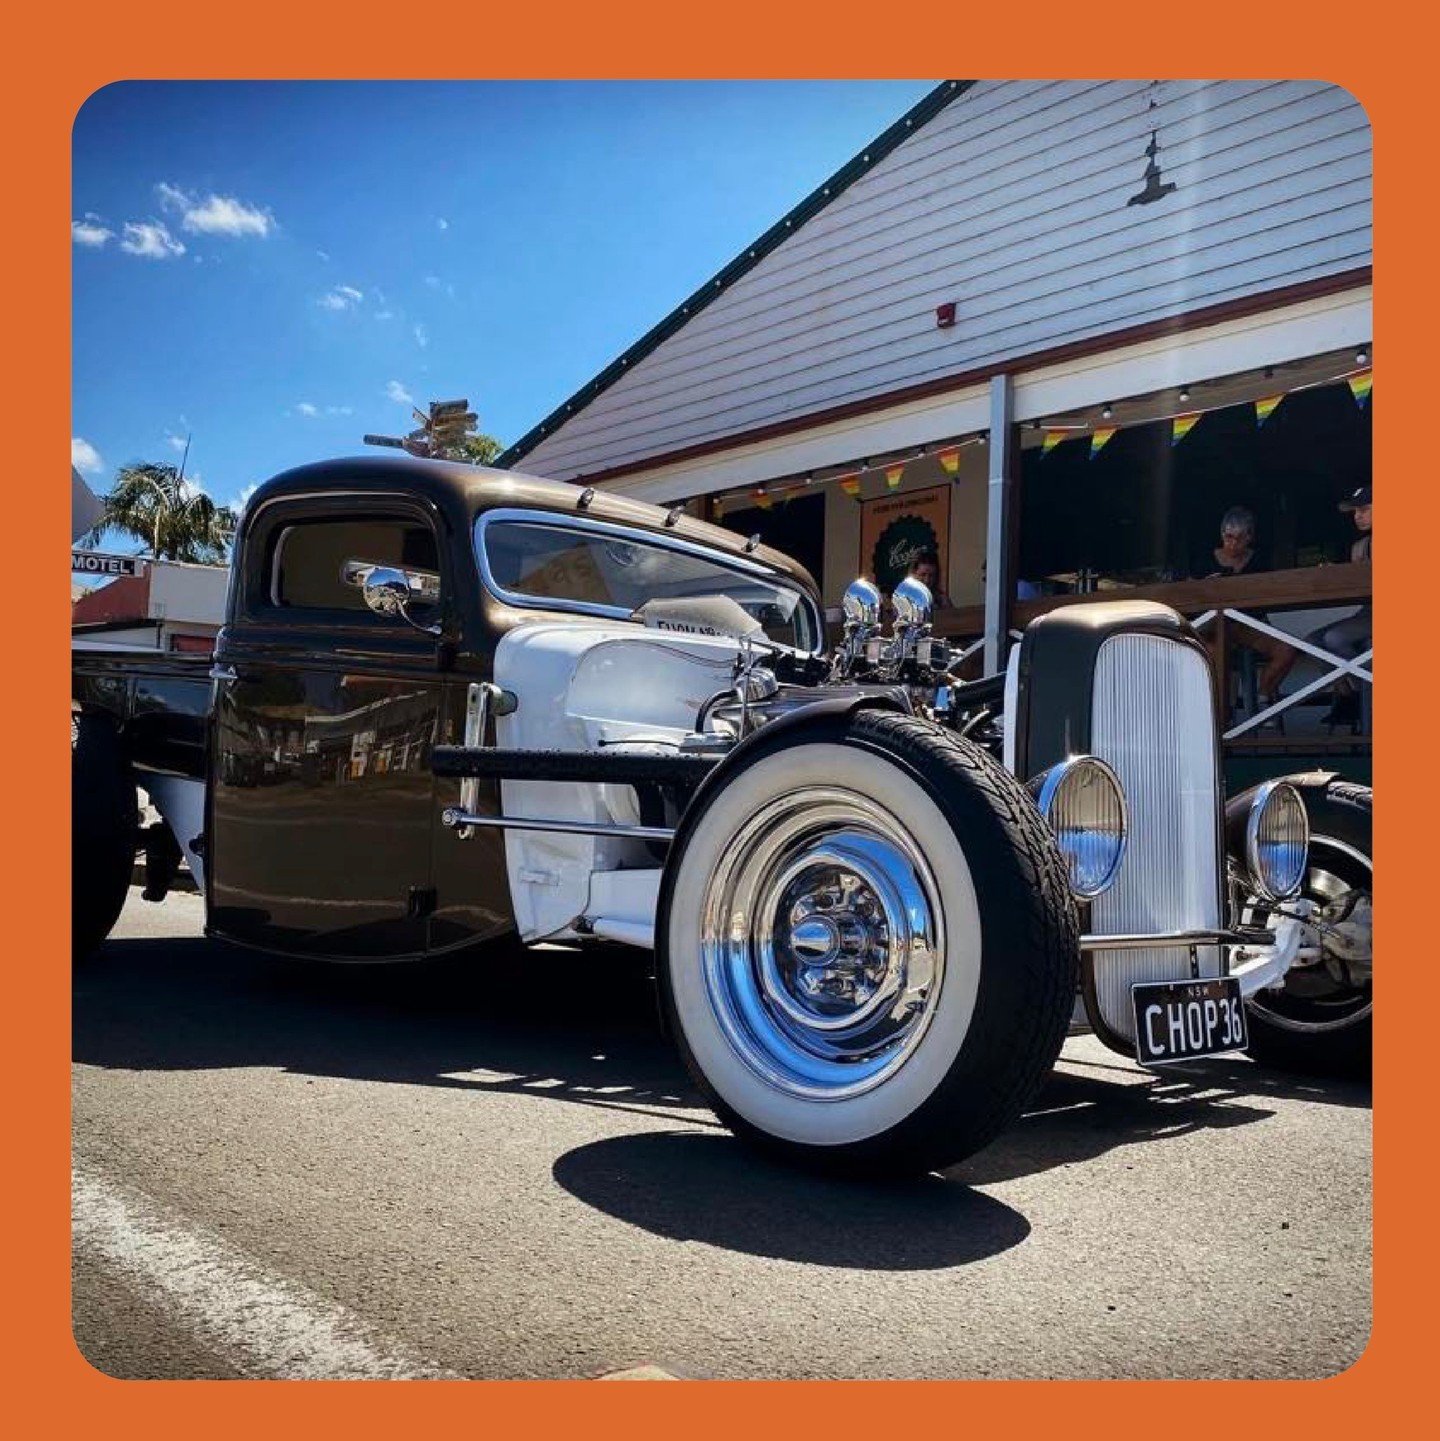 Rollin&rsquo; in style 🔥
.
.
.
#berrynsw #visitberry #southcoastnsw